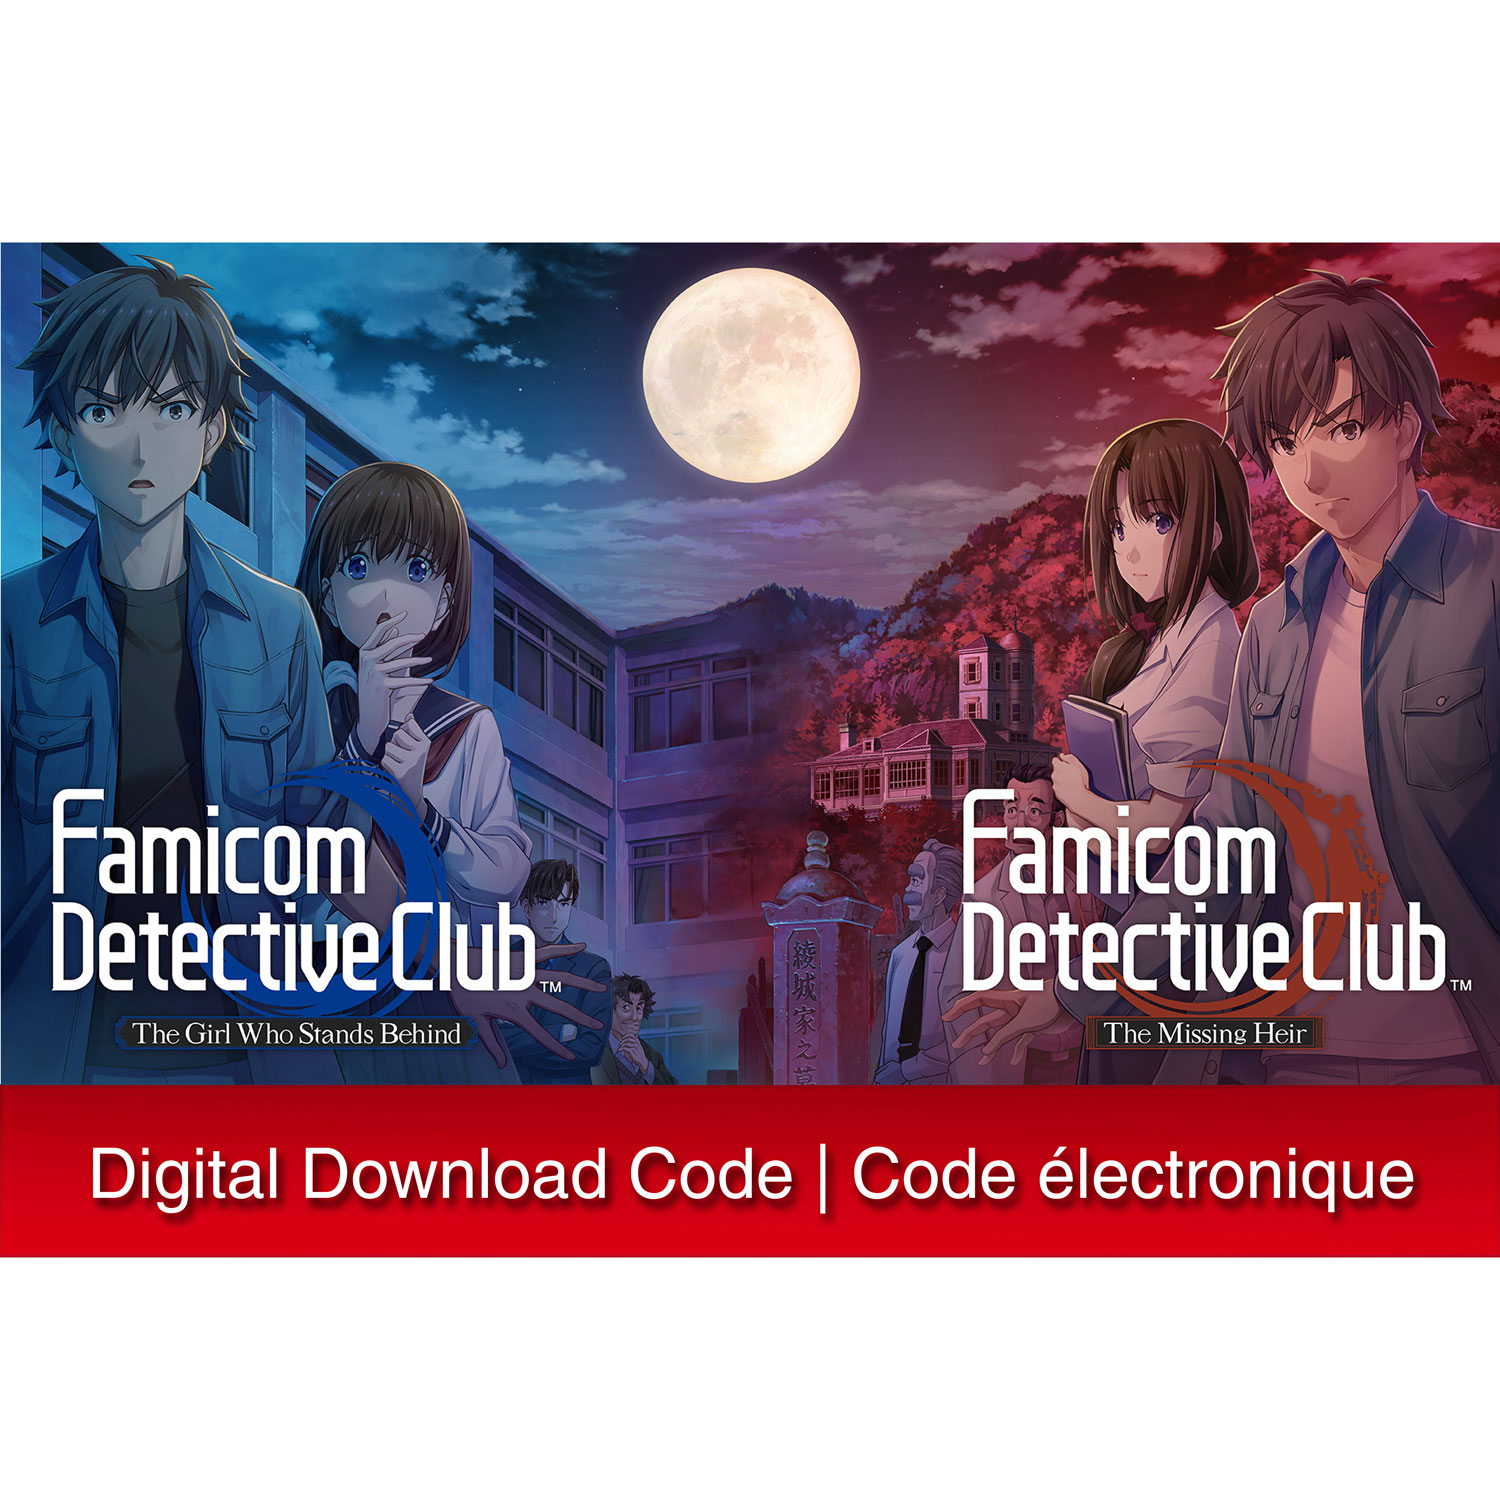 Famicom Detective Club: The Two-Case Collection (Switch) - Digital Download